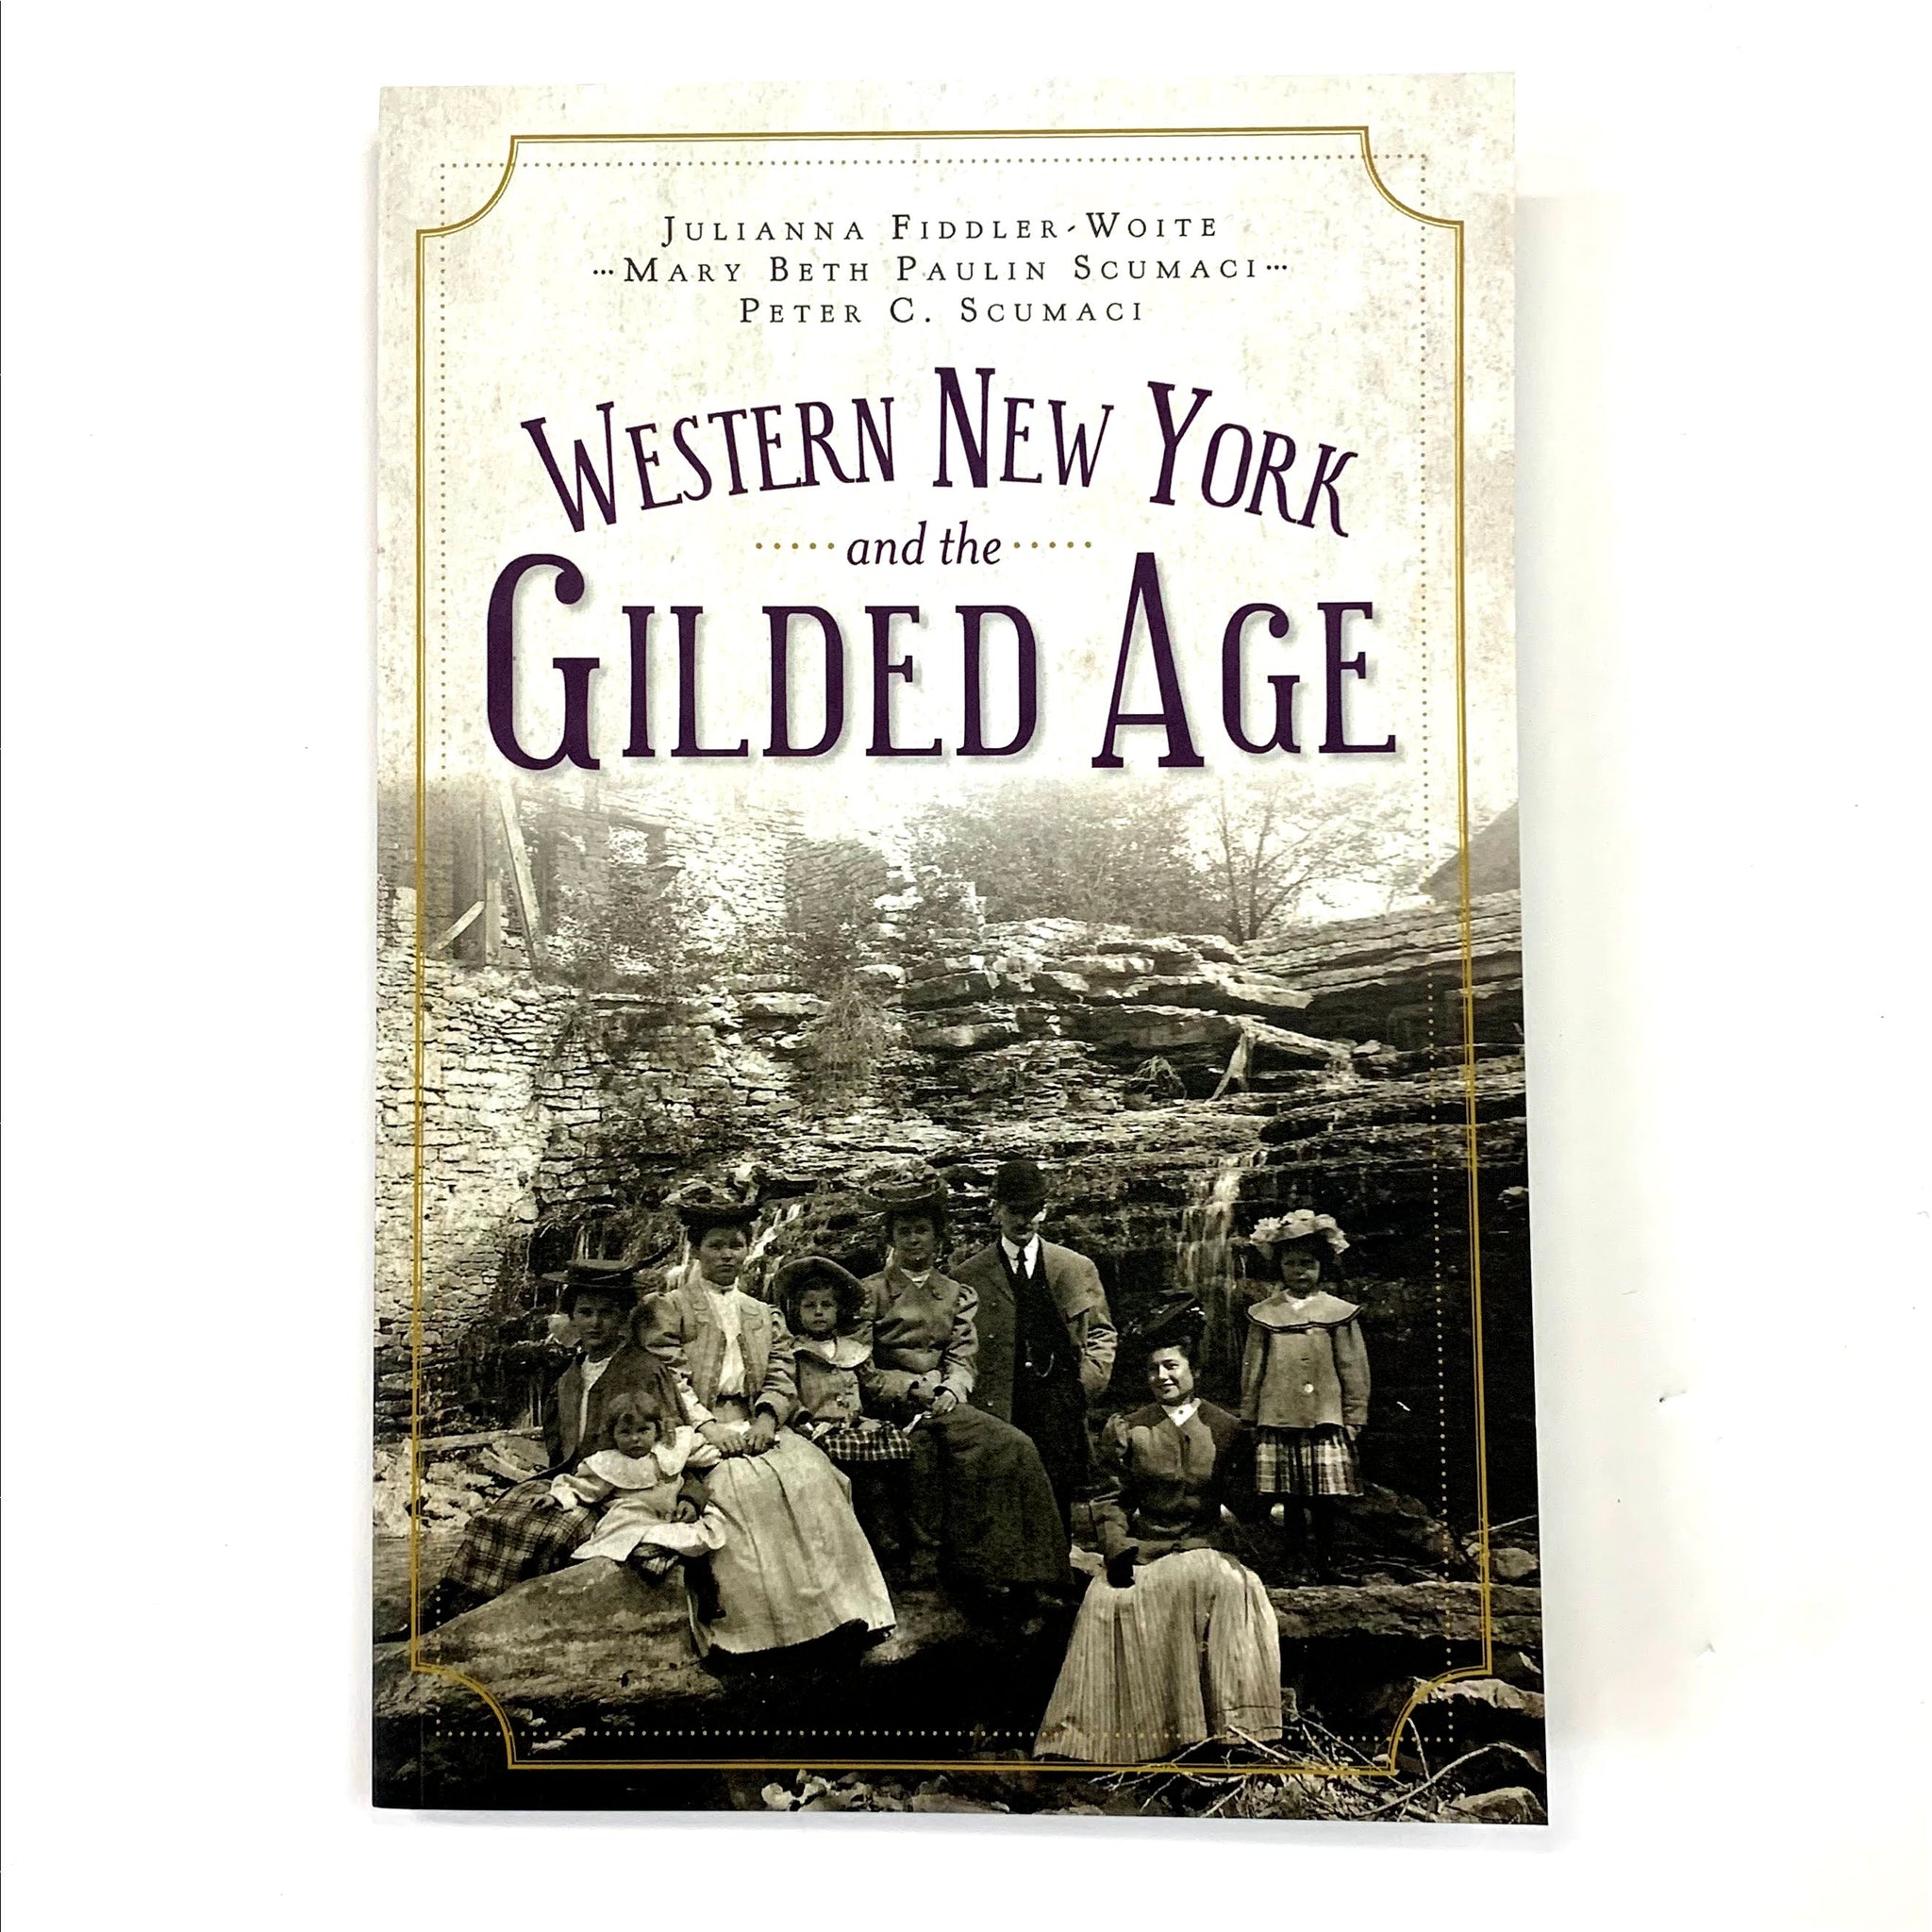 "Western New York and the Gilded Age" Book